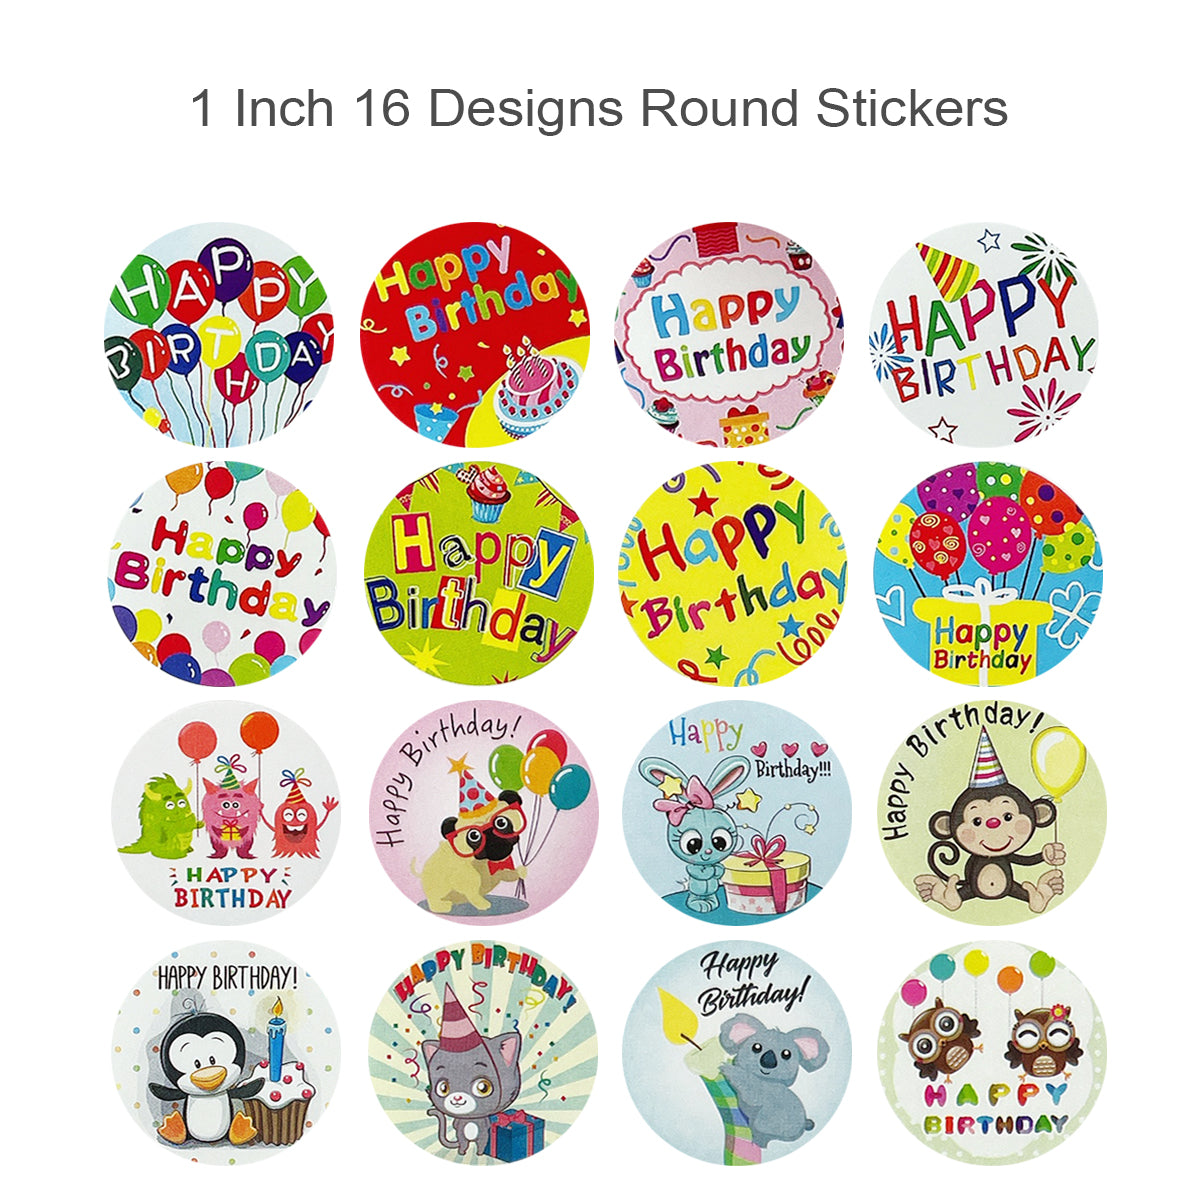 Wrapables 1 Inch Reward, Birthday, Thank You Stickers for Teachers, Students, Classrooms, Party Favors, Gifts, Boxes & Bags (1000pcs)